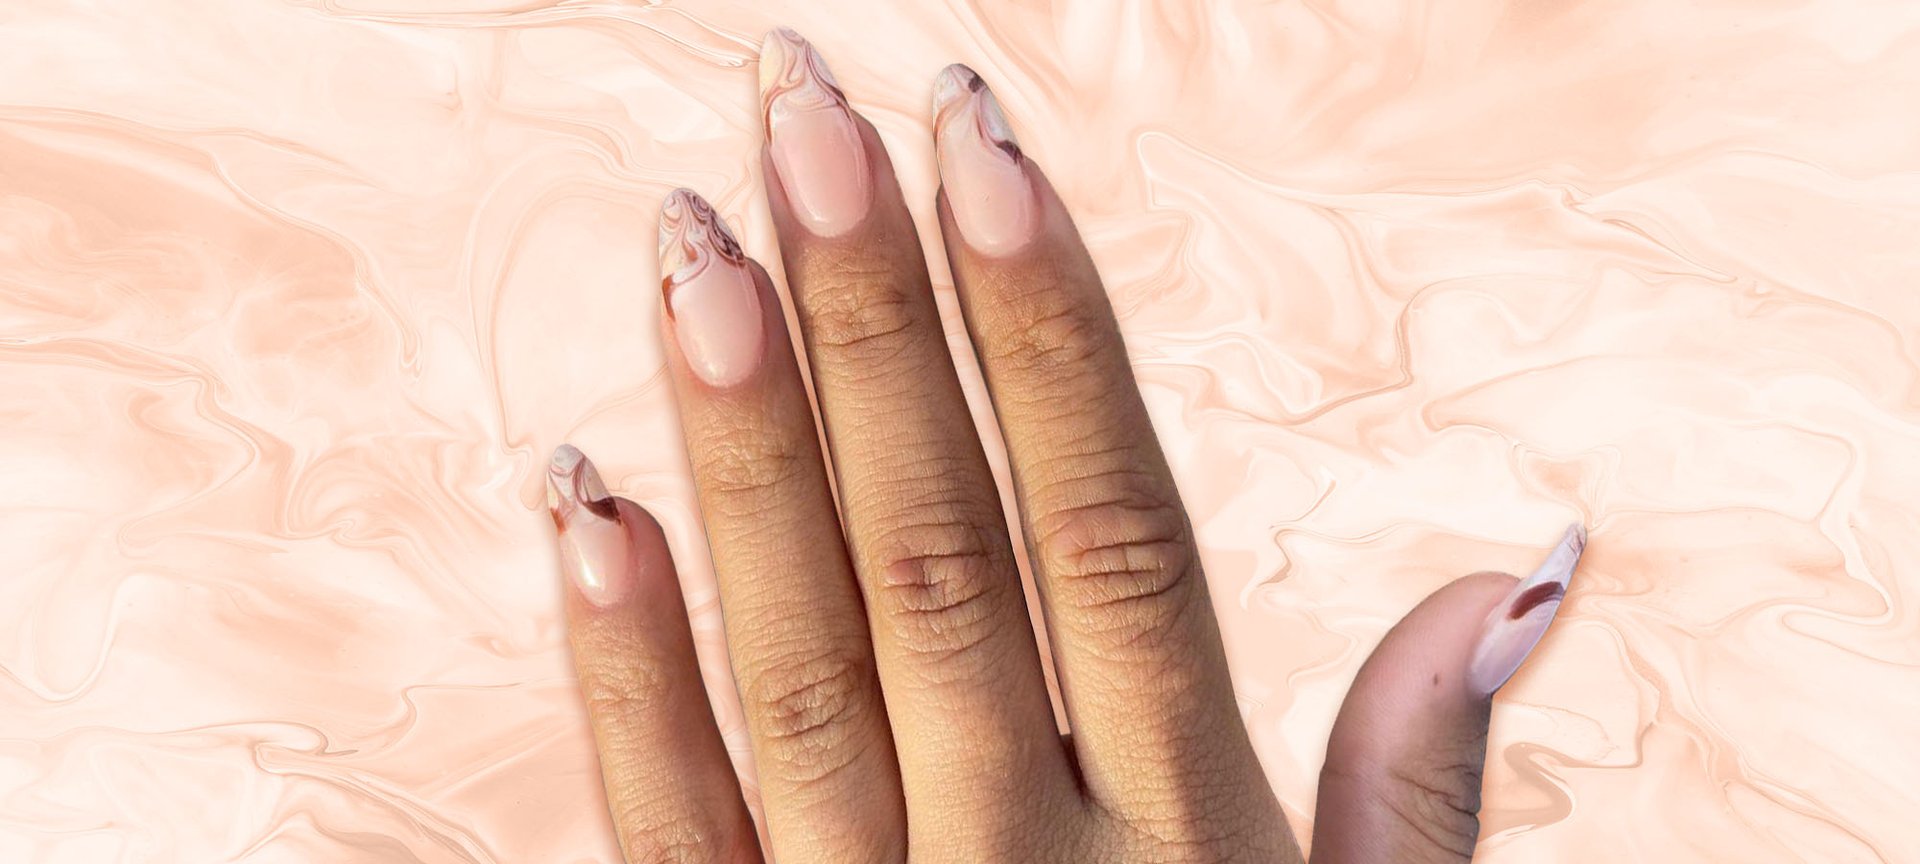 Marbled French Manicure